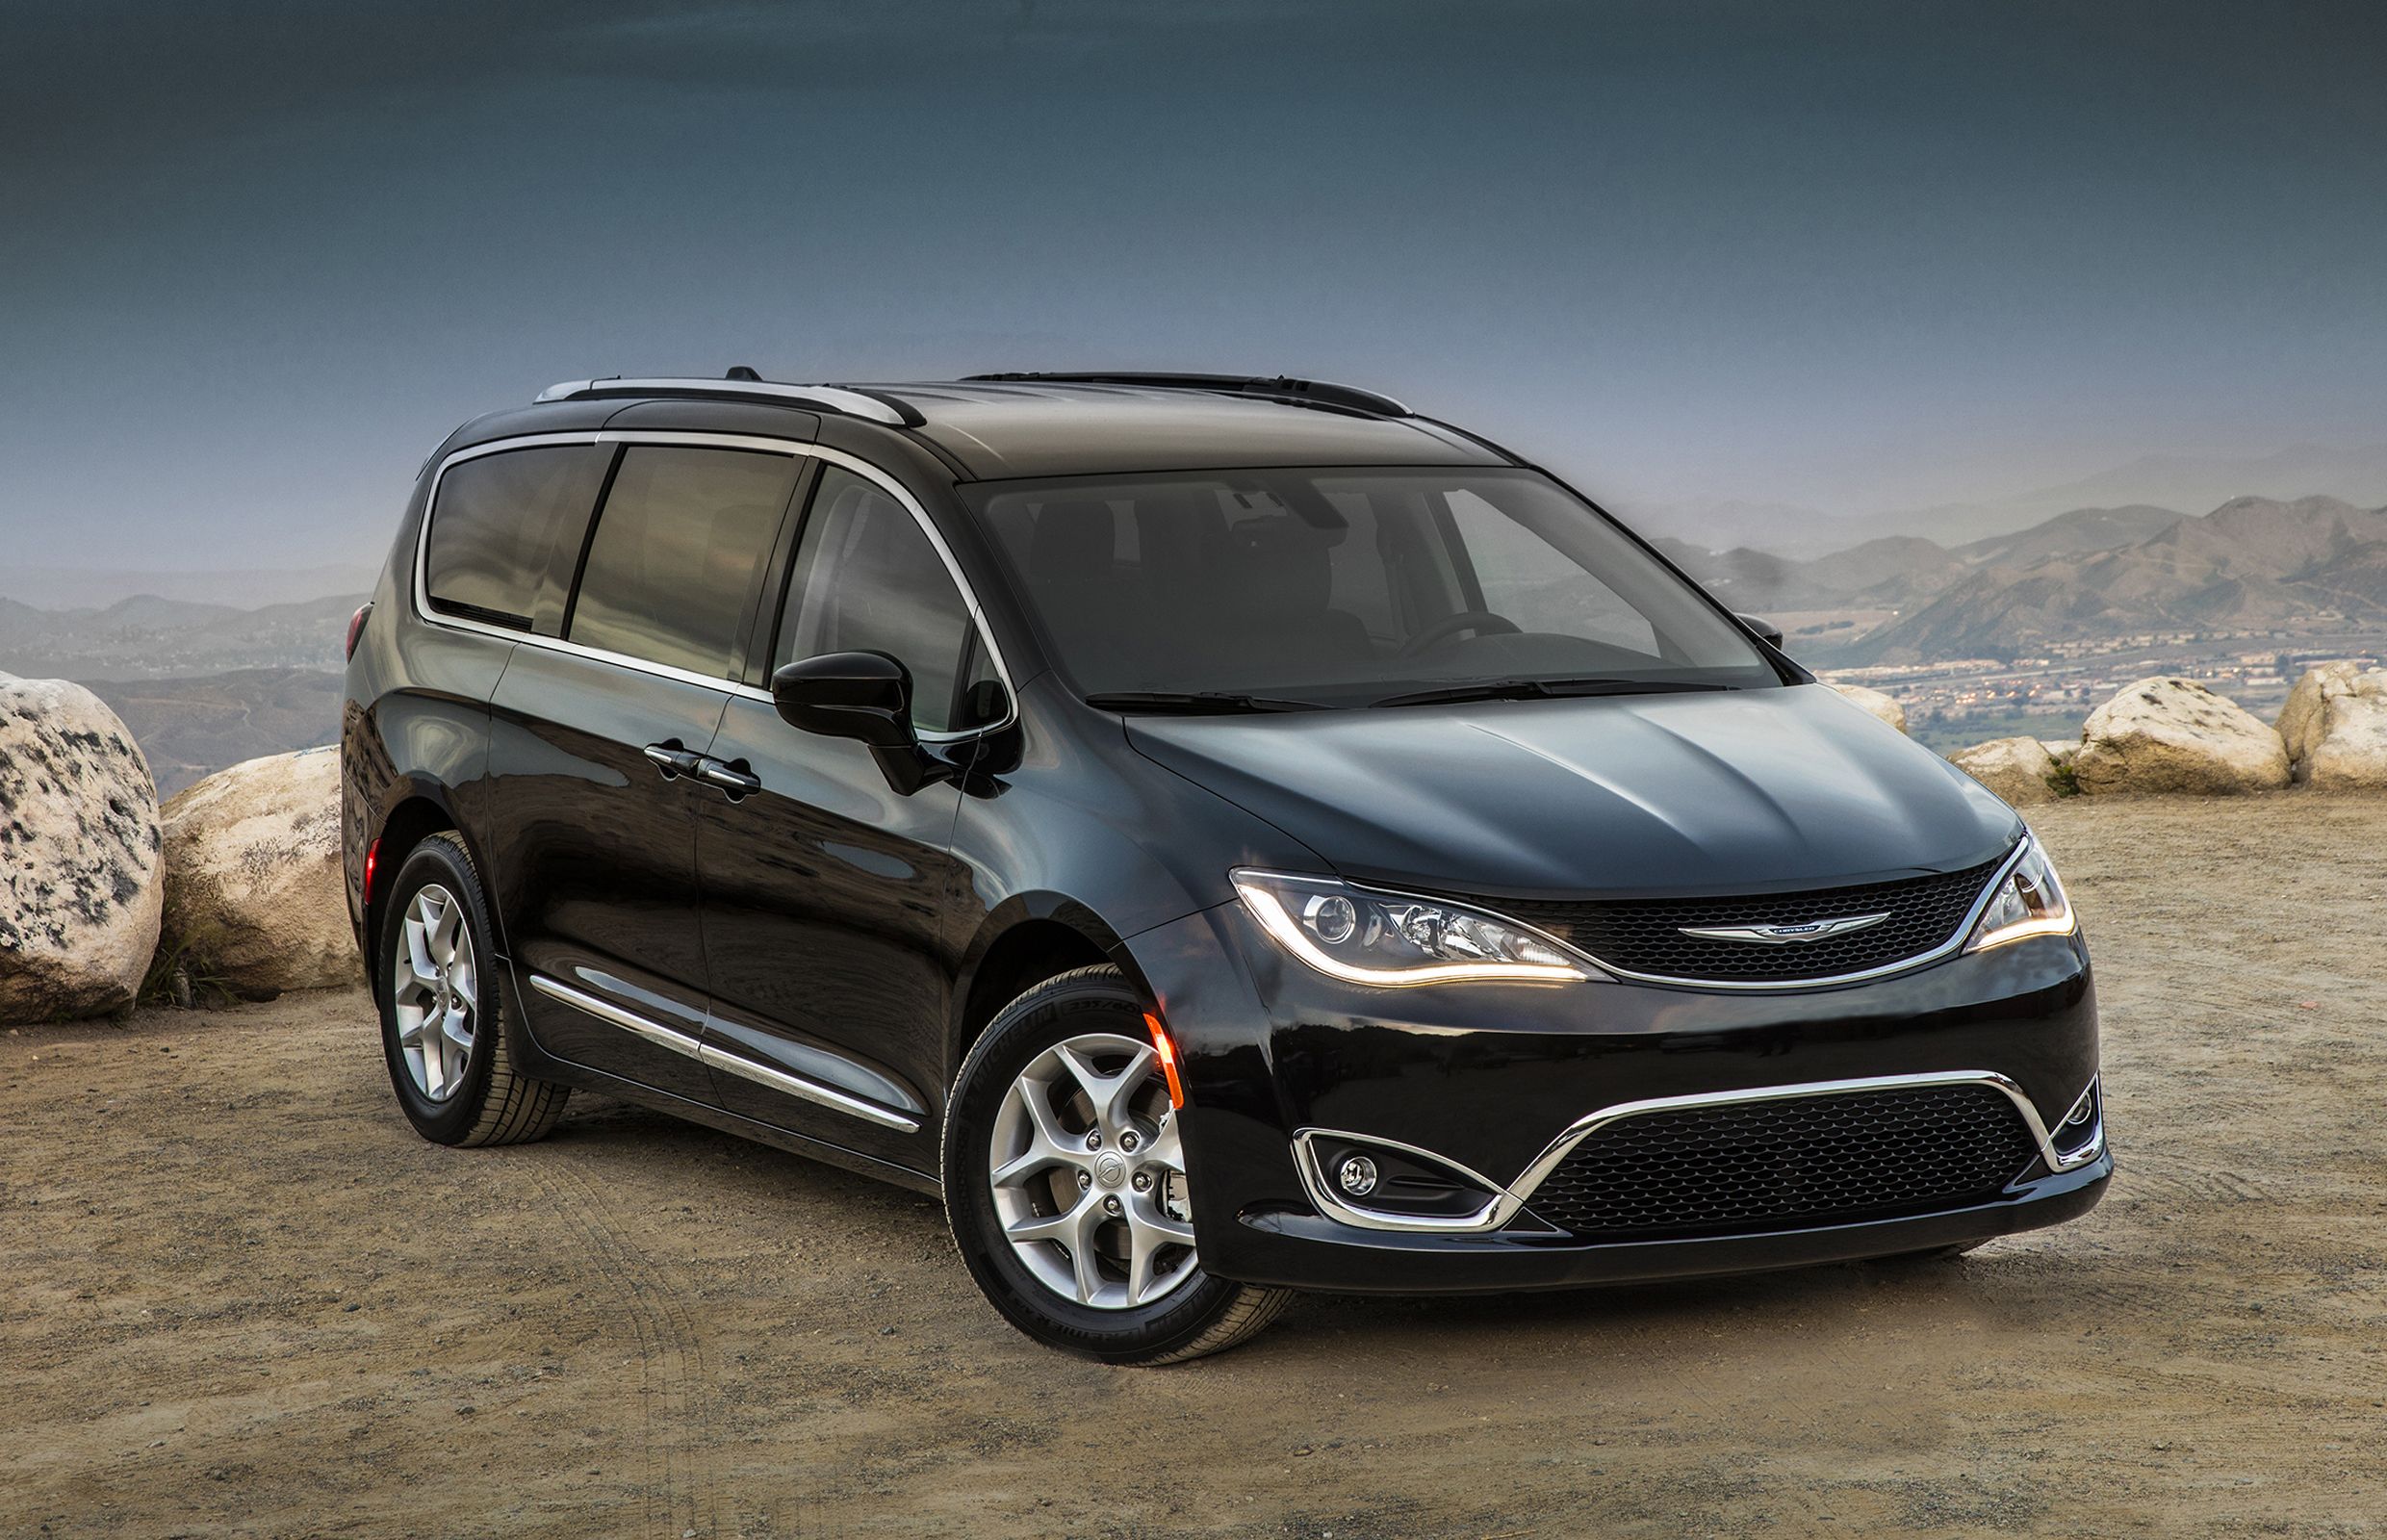 Chrysler Pacifica recall follows months of engine stalls Driving